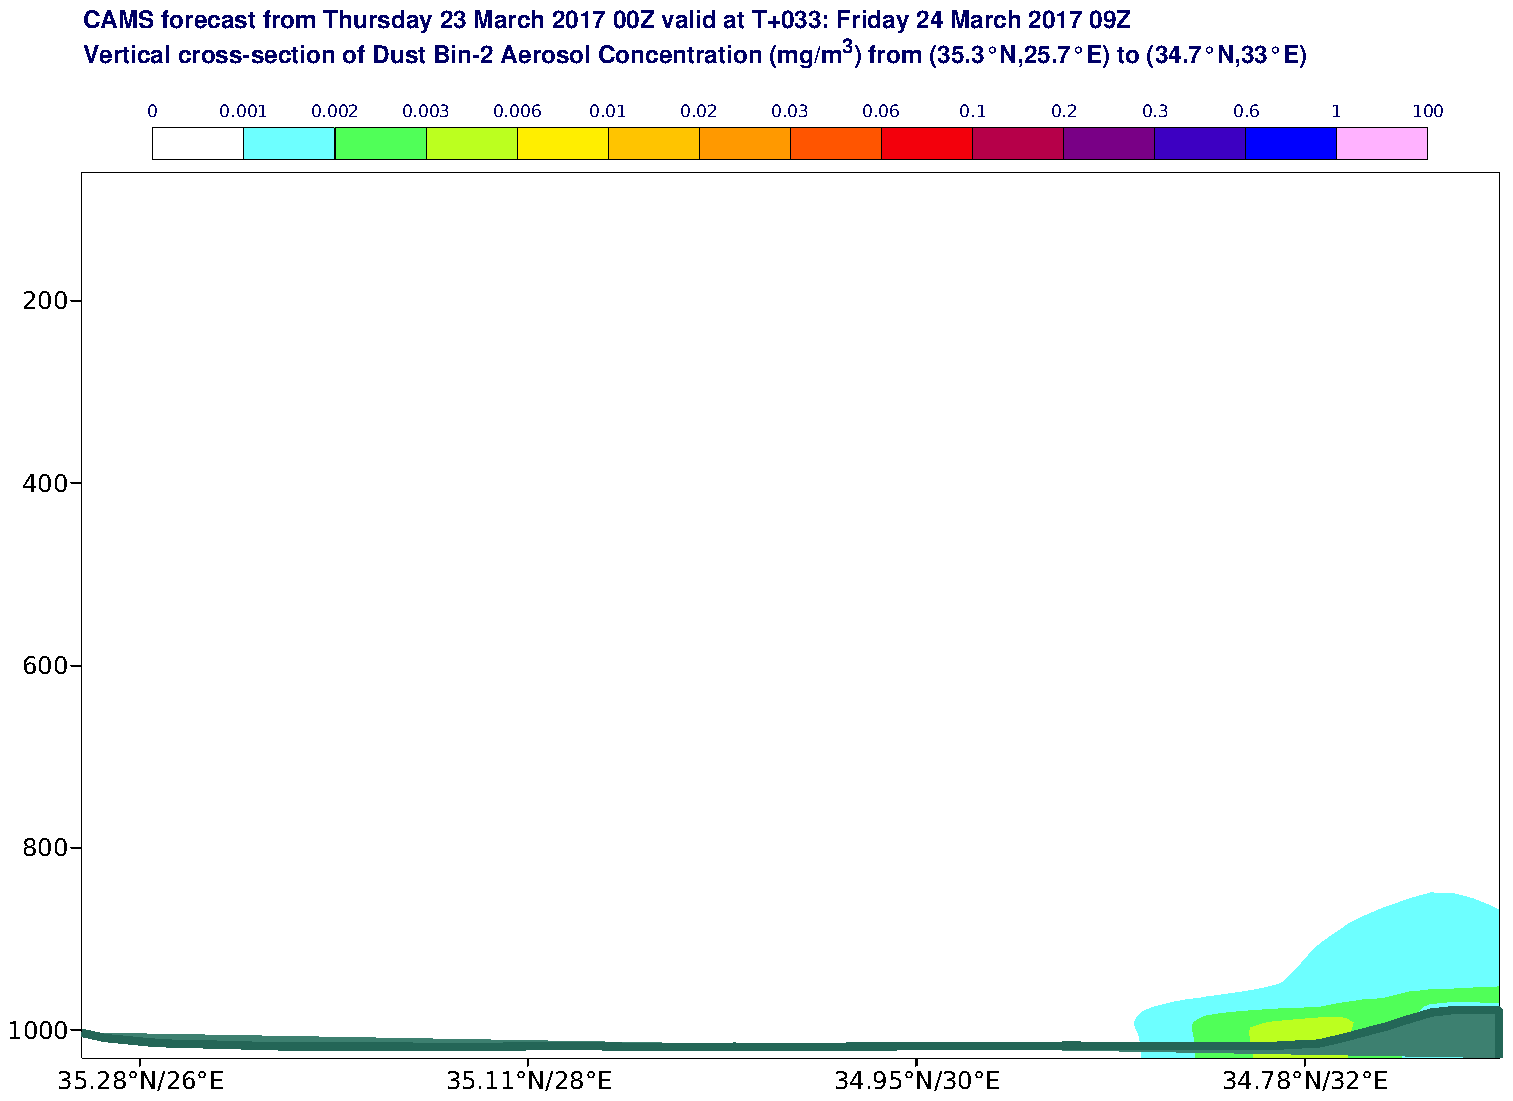 Vertical cross-section of Dust Bin-2 Aerosol Concentration (mg/m3) valid at T33 - 2017-03-24 09:00